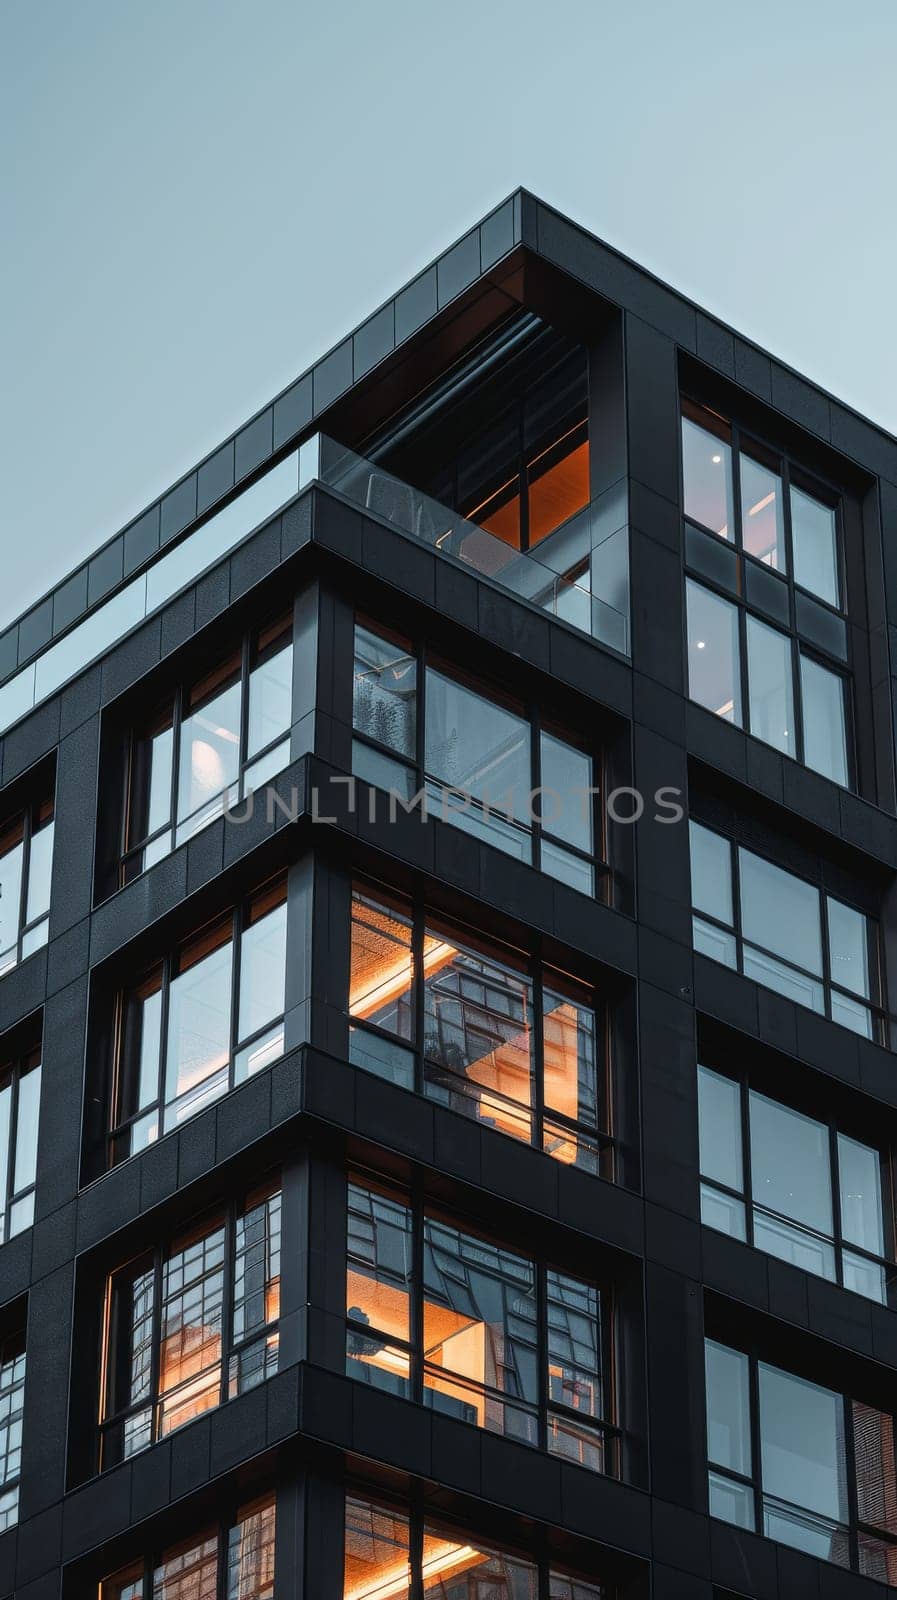 A tall building with a lot of windows and a sign on the side. The building is lit up with a warm glow, giving it a welcoming and inviting appearance. The surrounding area is quiet